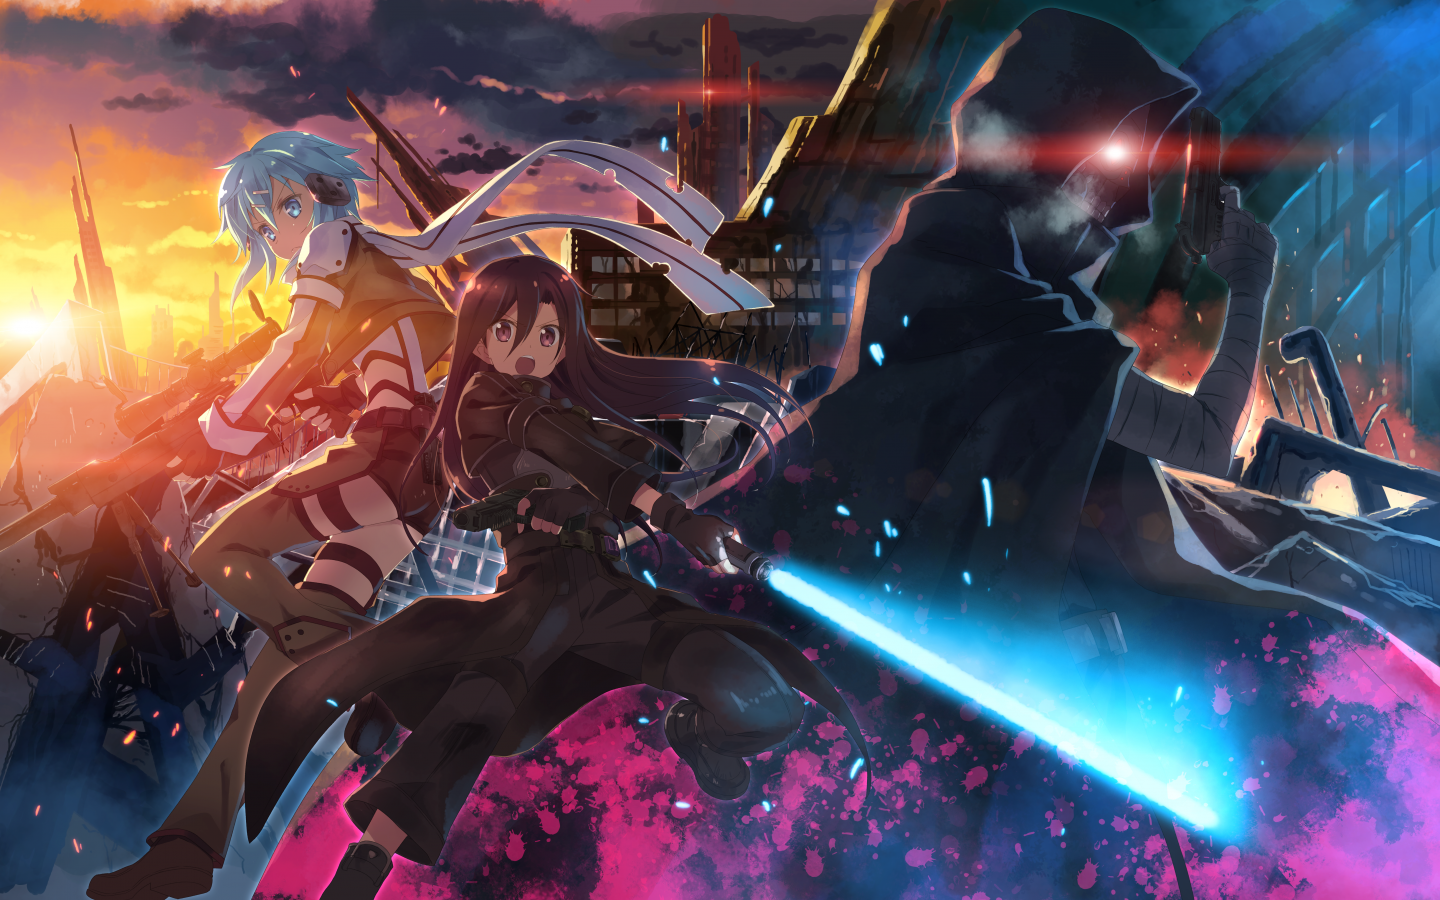 anime wallpaper 1440x900,action adventure game,cg artwork,fictional character,illustration,games